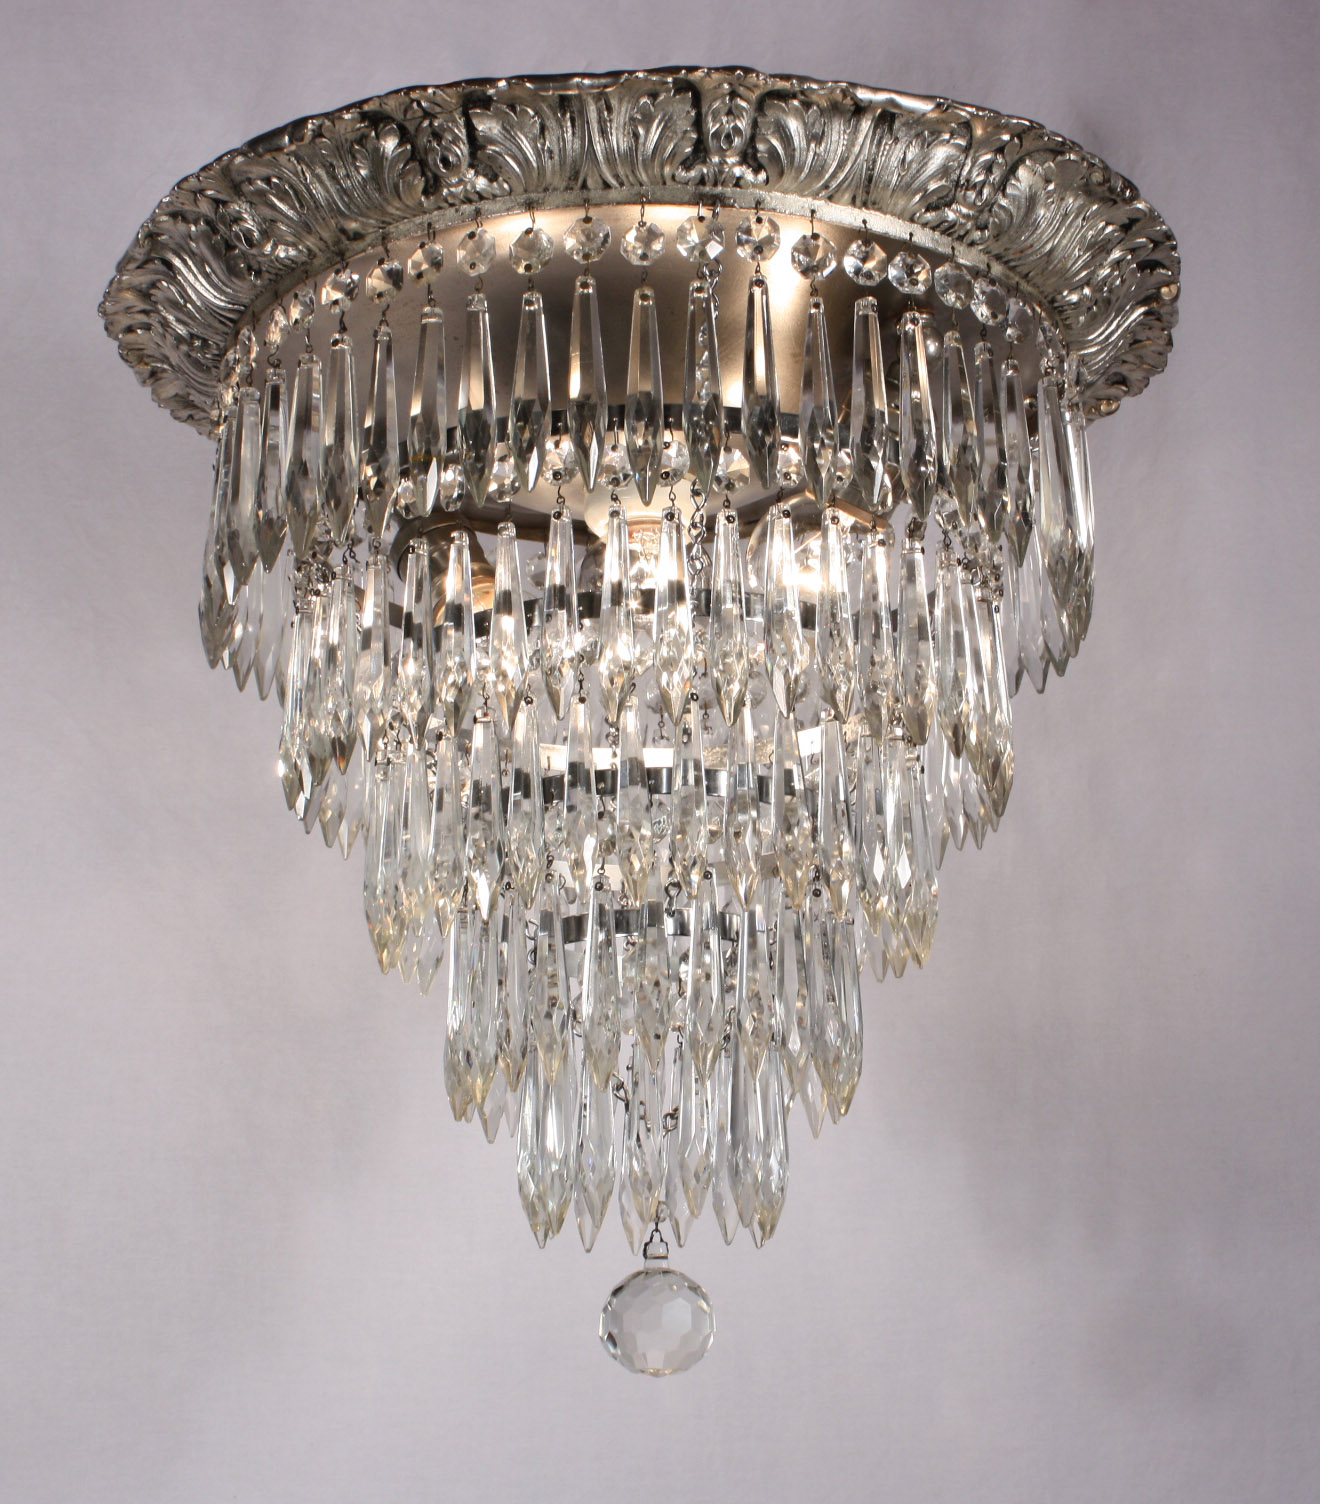 SOLD Wonderful Antique Neoclassical Five-Tier Chandelier, Silver Plated, Flush Mount-18751